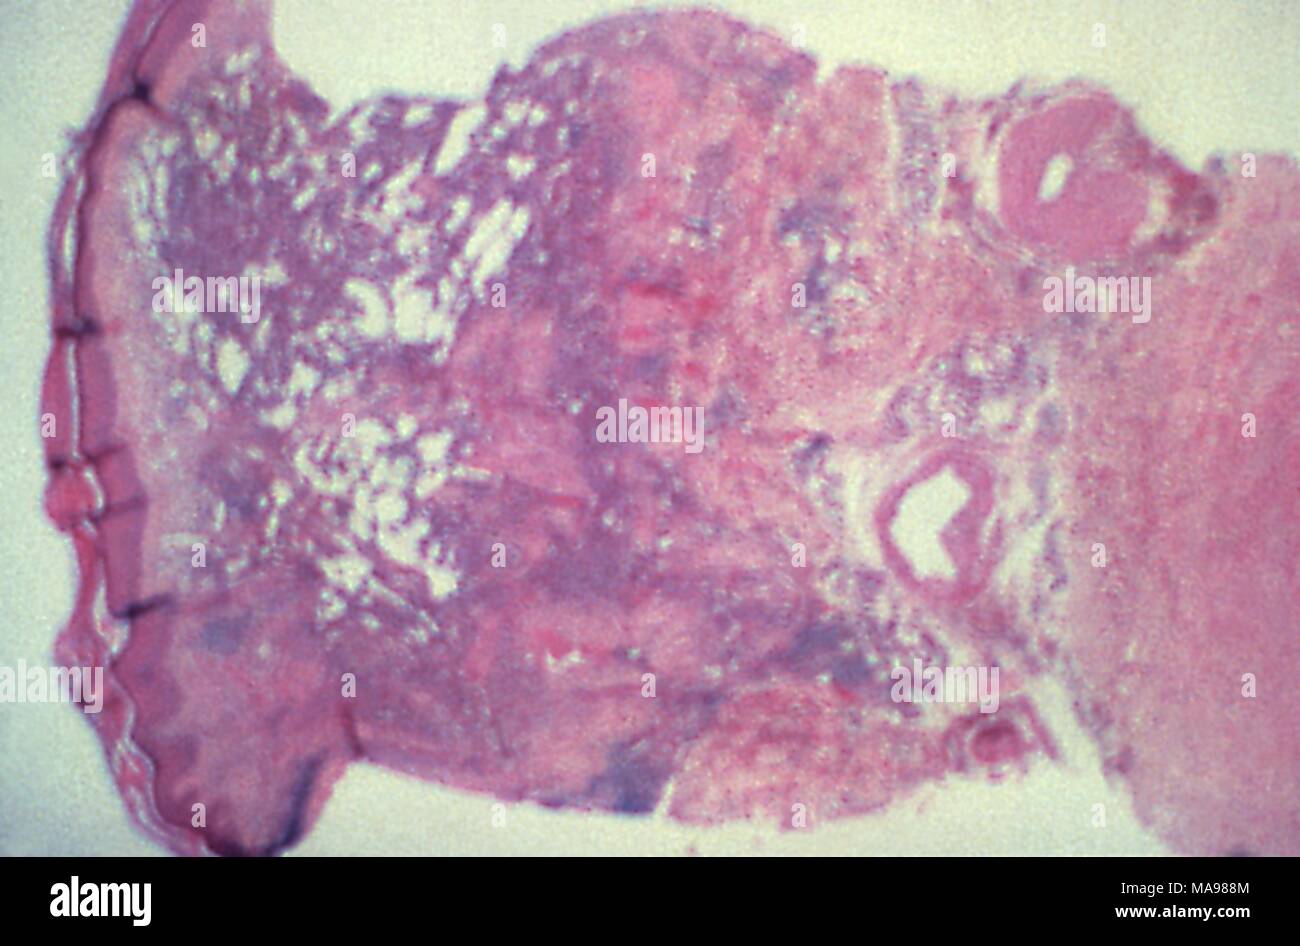 Kaposi's sarcoma in human skin revealed in the low magnification photomicrograph film, 1983. Image courtesy Centers for Disease Control (CDC) / Dr Peter Drotman. () Stock Photo